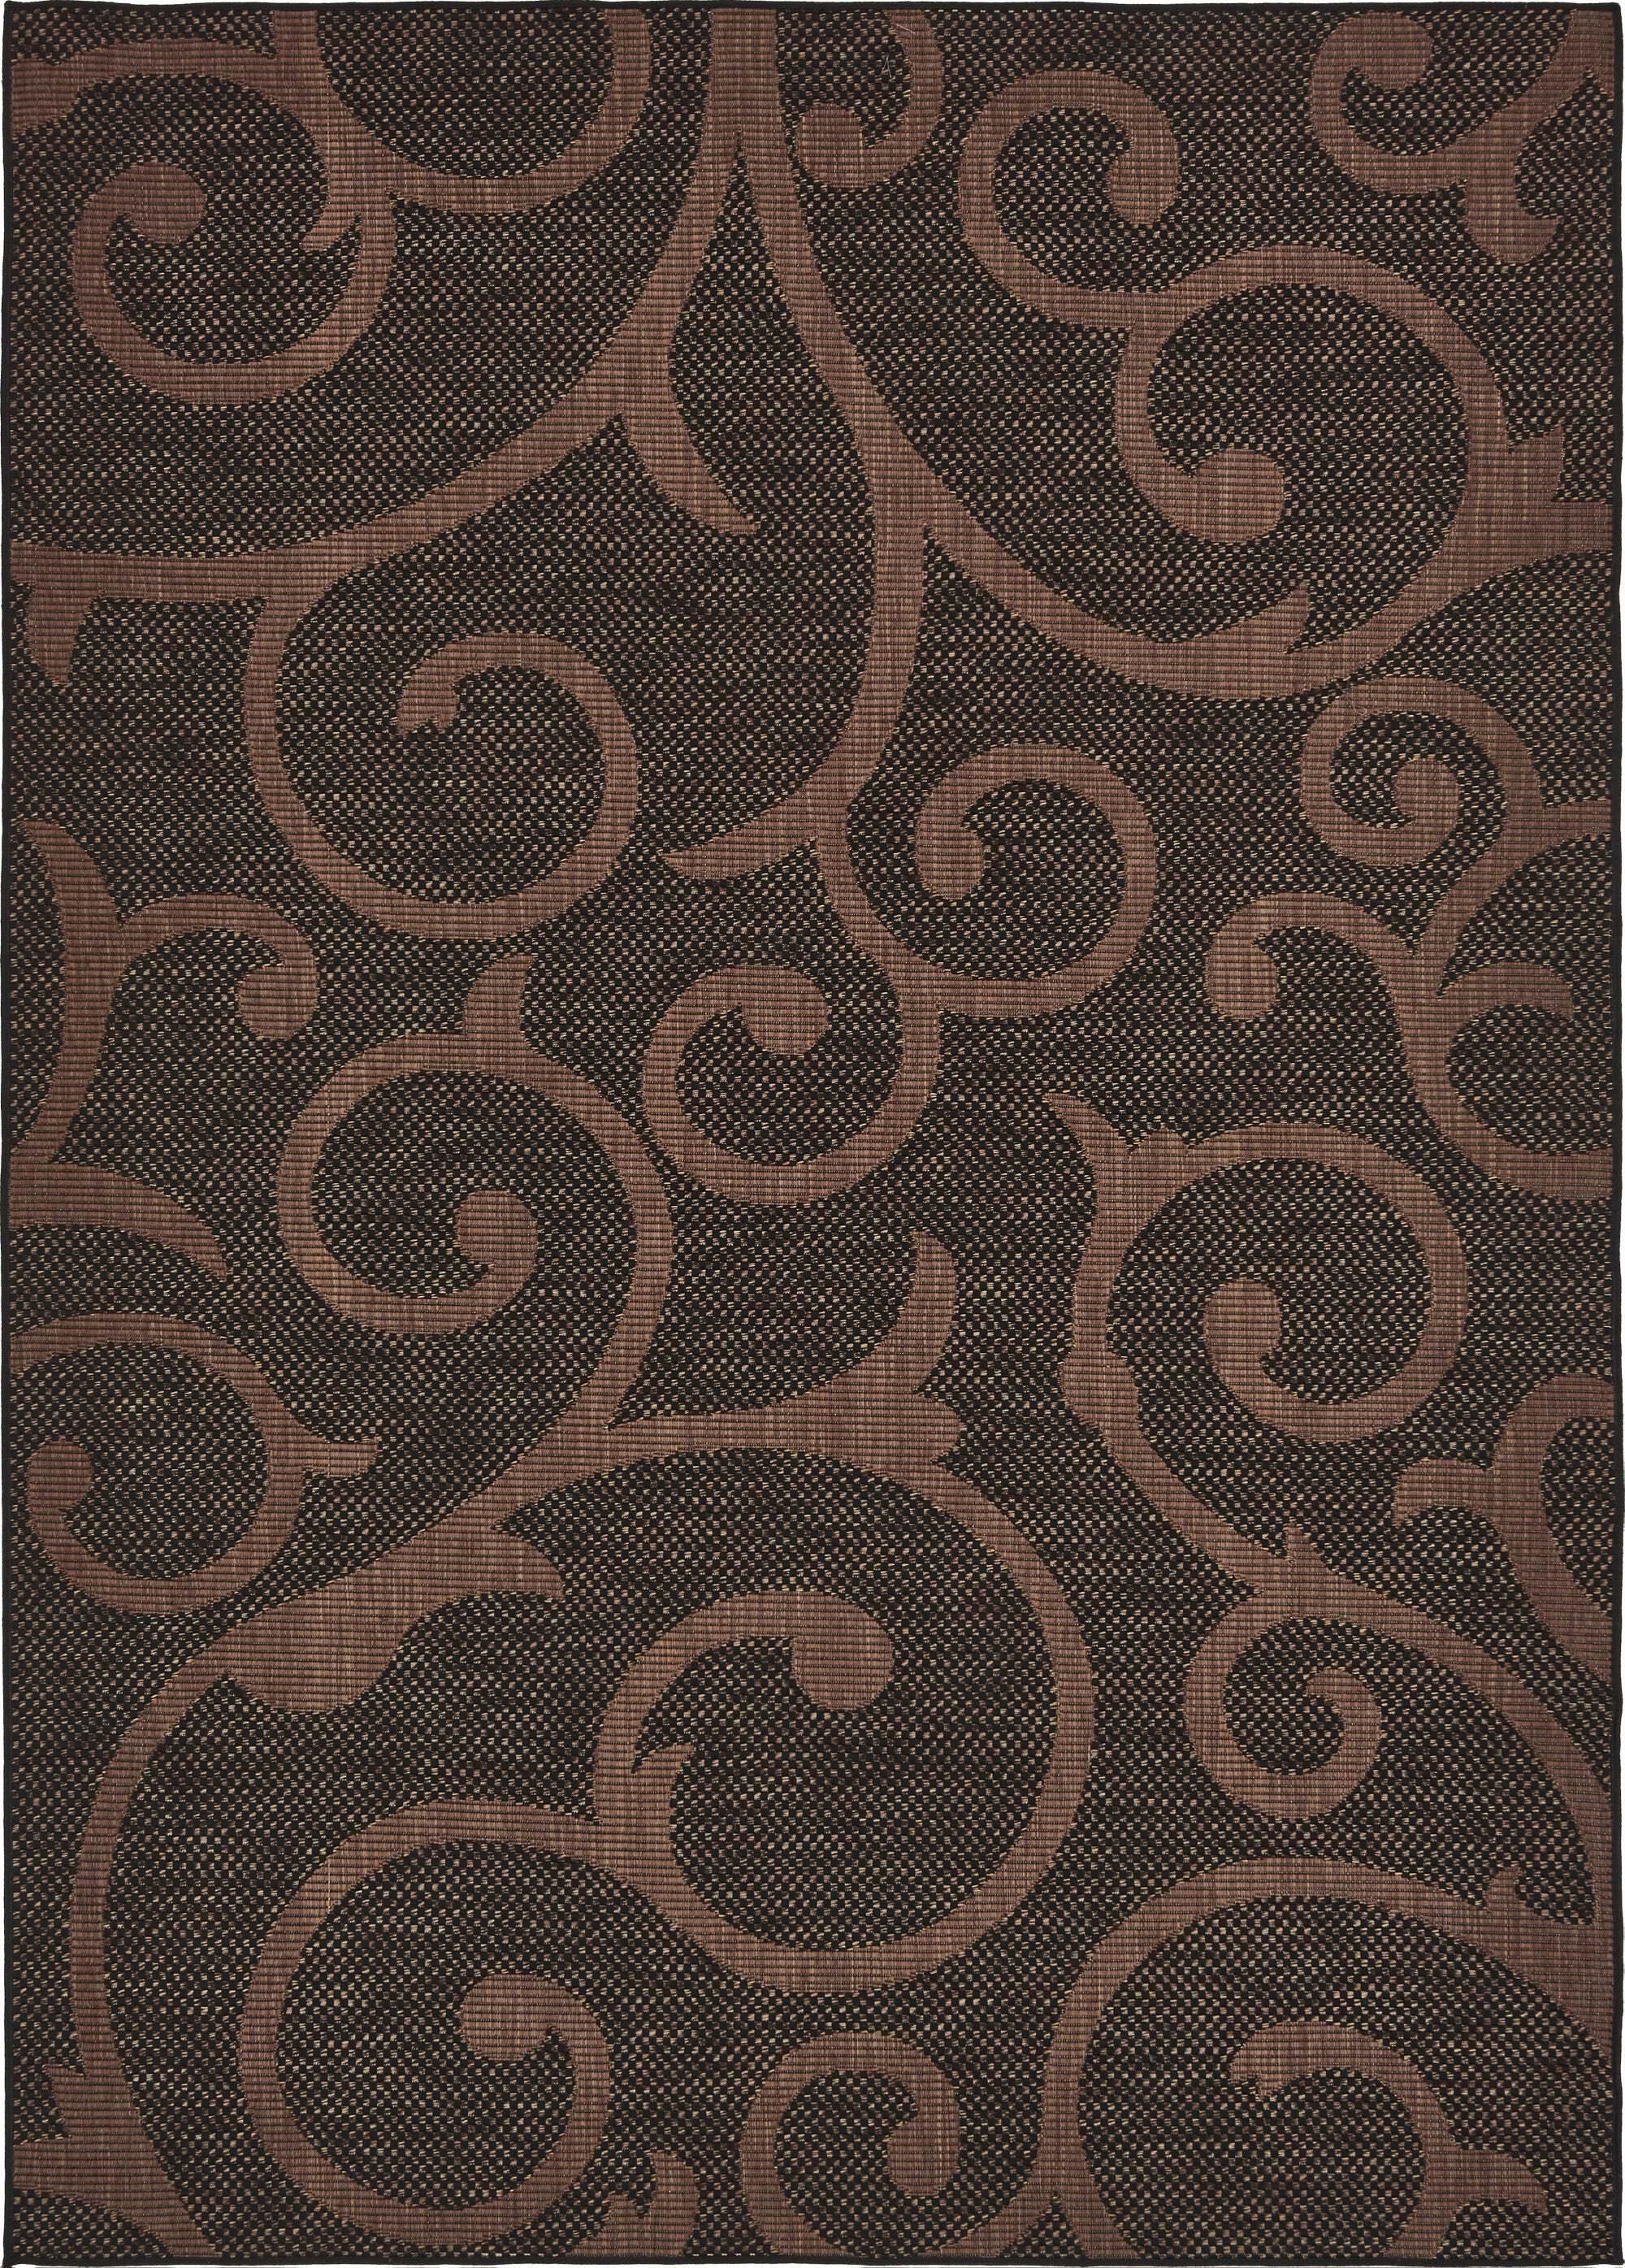 Unique Loom Outdoor Rugs - Outdoor Botanical Damask Rectangular 8x11 Rug Chocolate Brown & Black